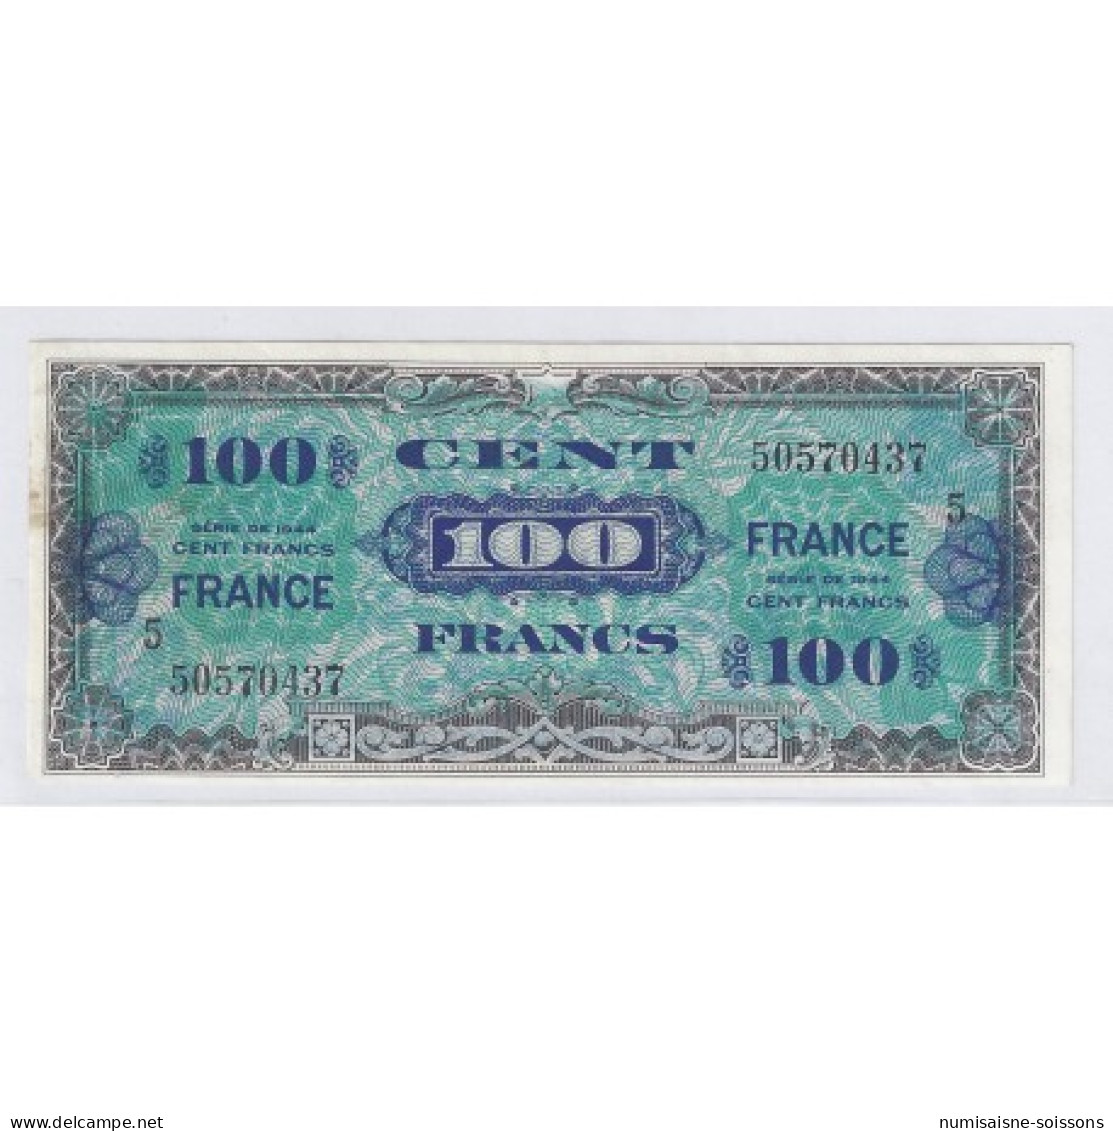 FAY VF 25/5 - 100 FRANCS VERSO FRANCE - 1945 - SÉRIE 5 - SUP - PICK 105s - Unclassified